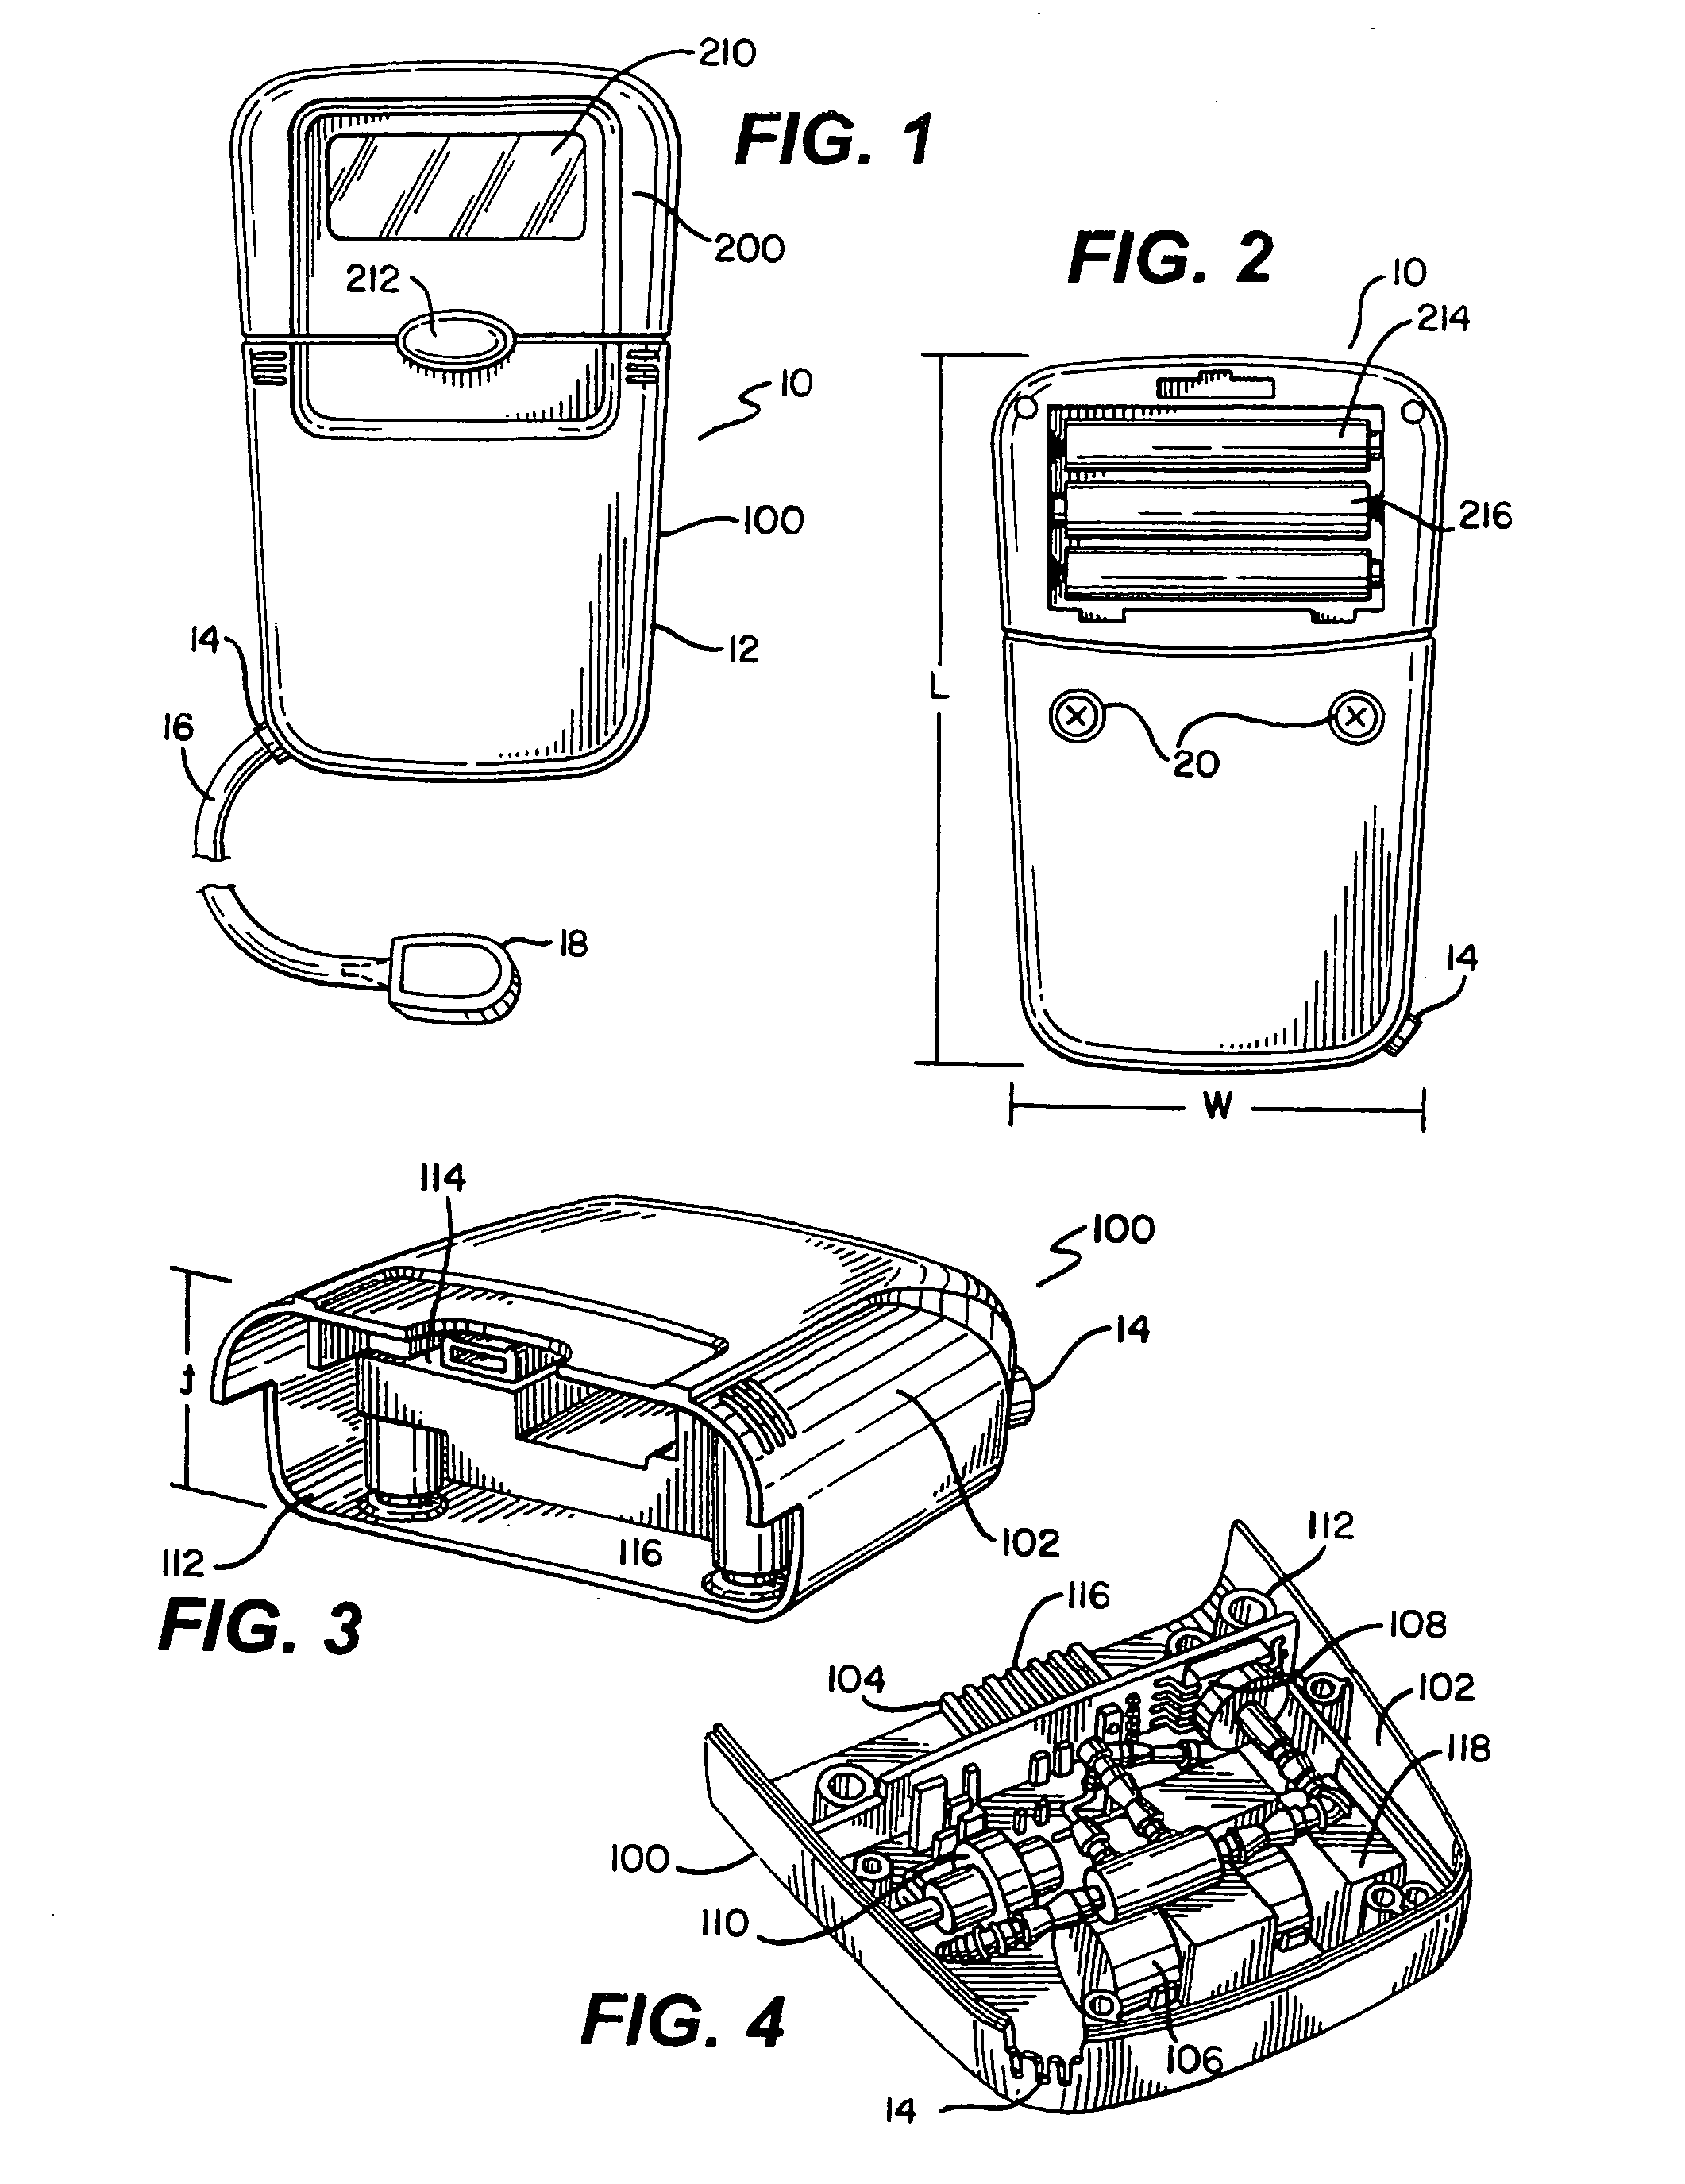 Control unit with pump module for a negative pressure wound therapy device